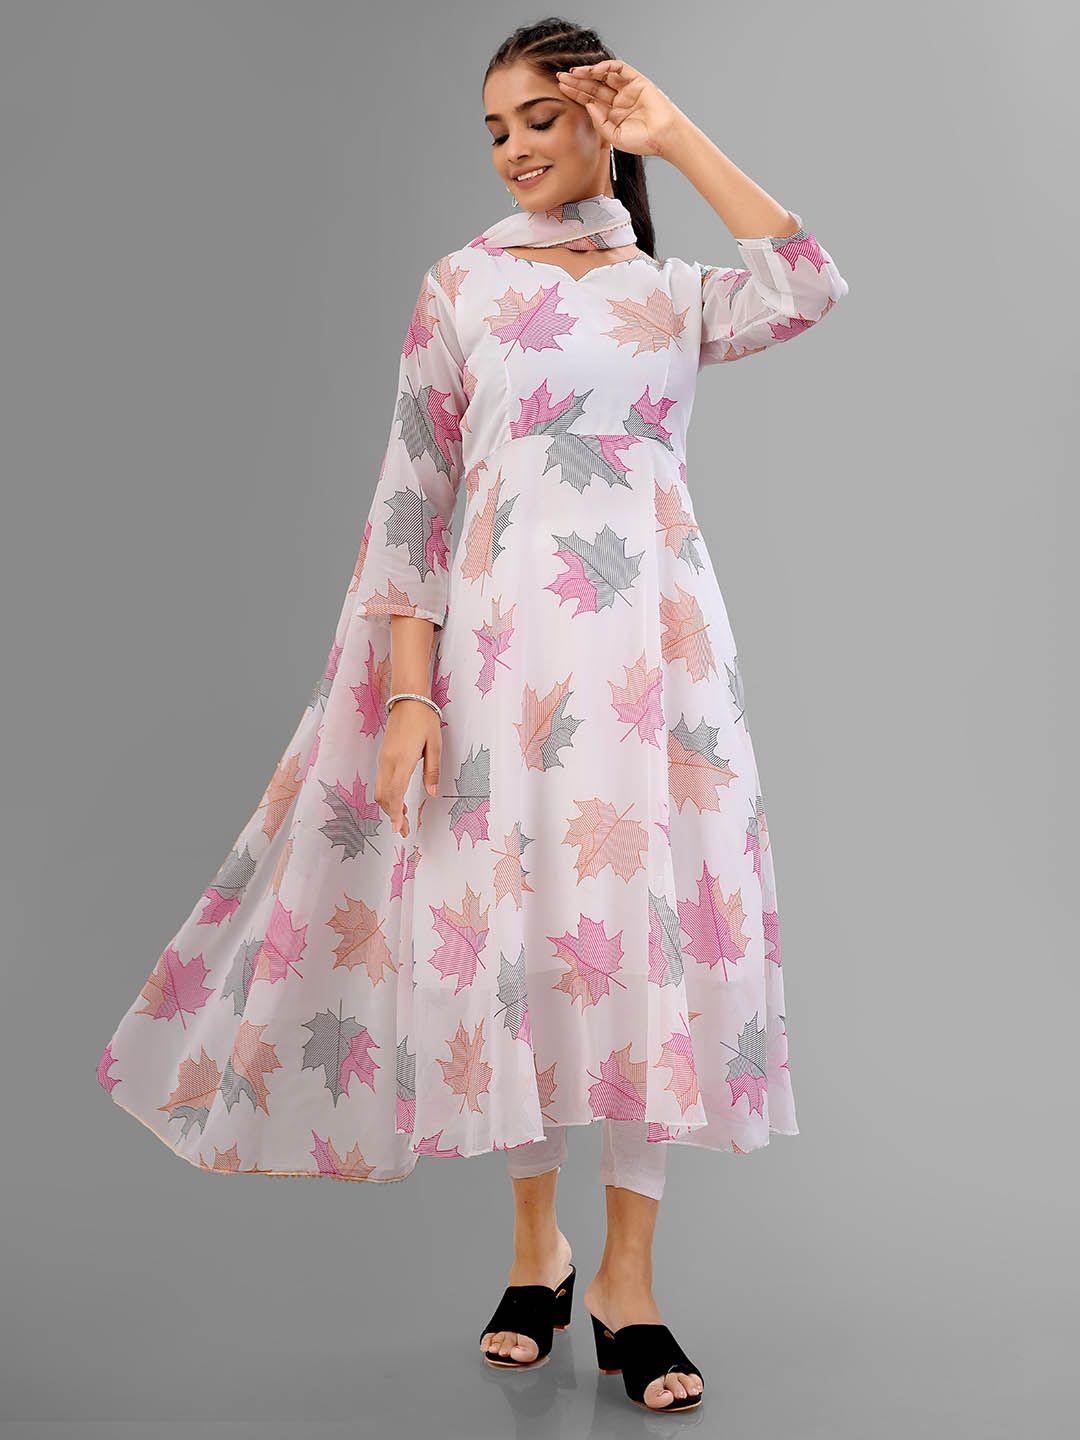 crally floral print georgette formal empire midi dress